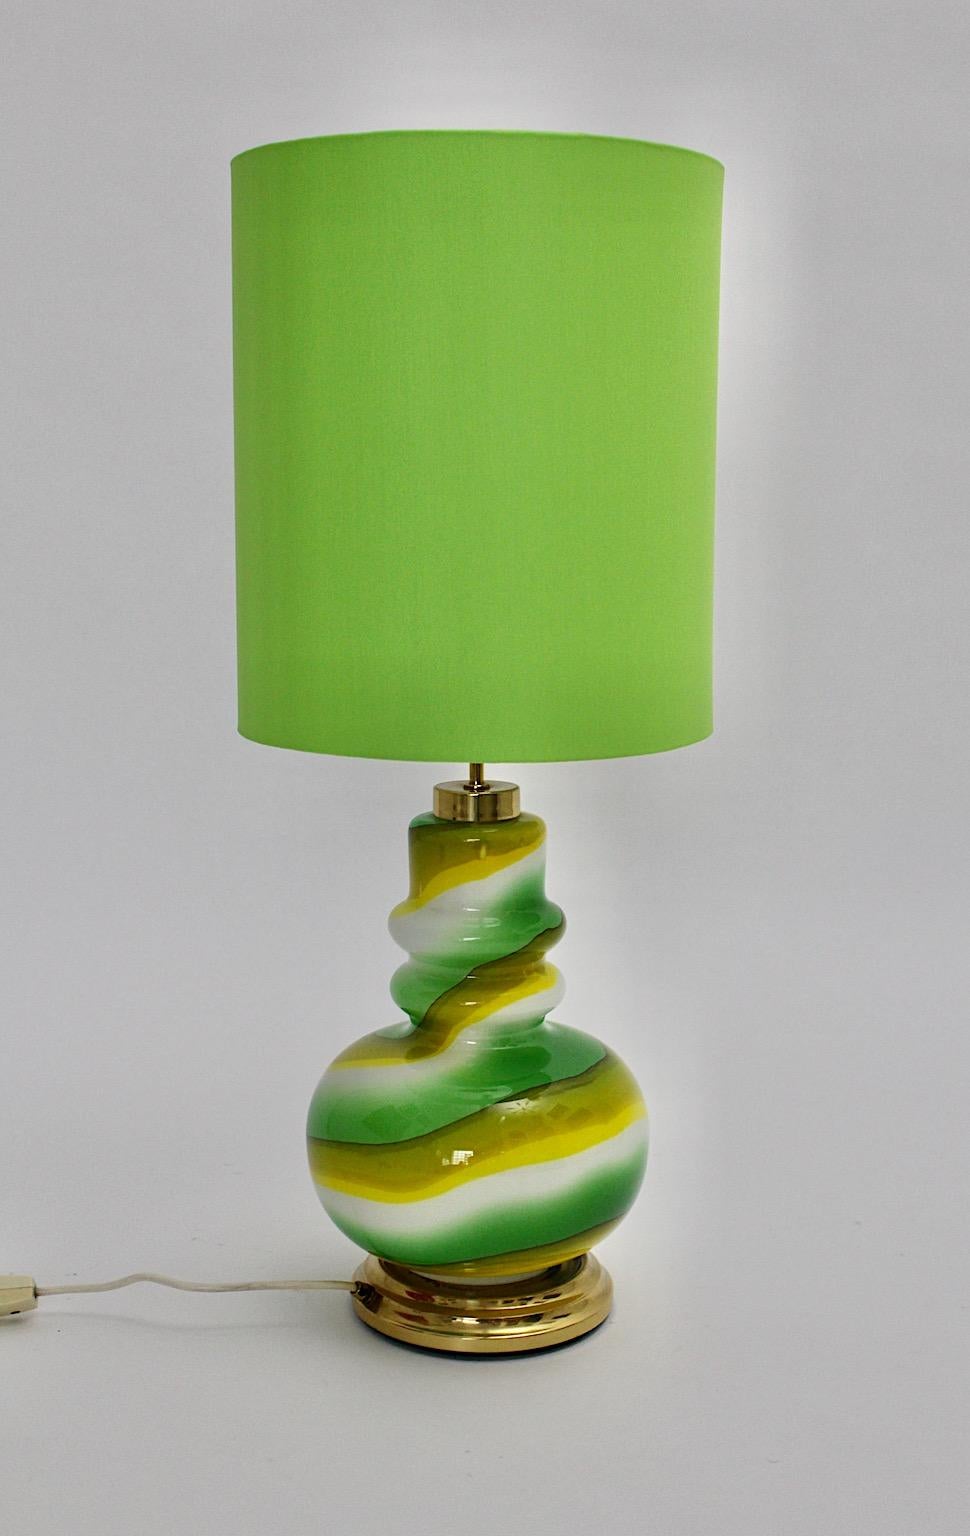 Vintage Green Glass Table Lamp - 7 For Sale on 1stDibs